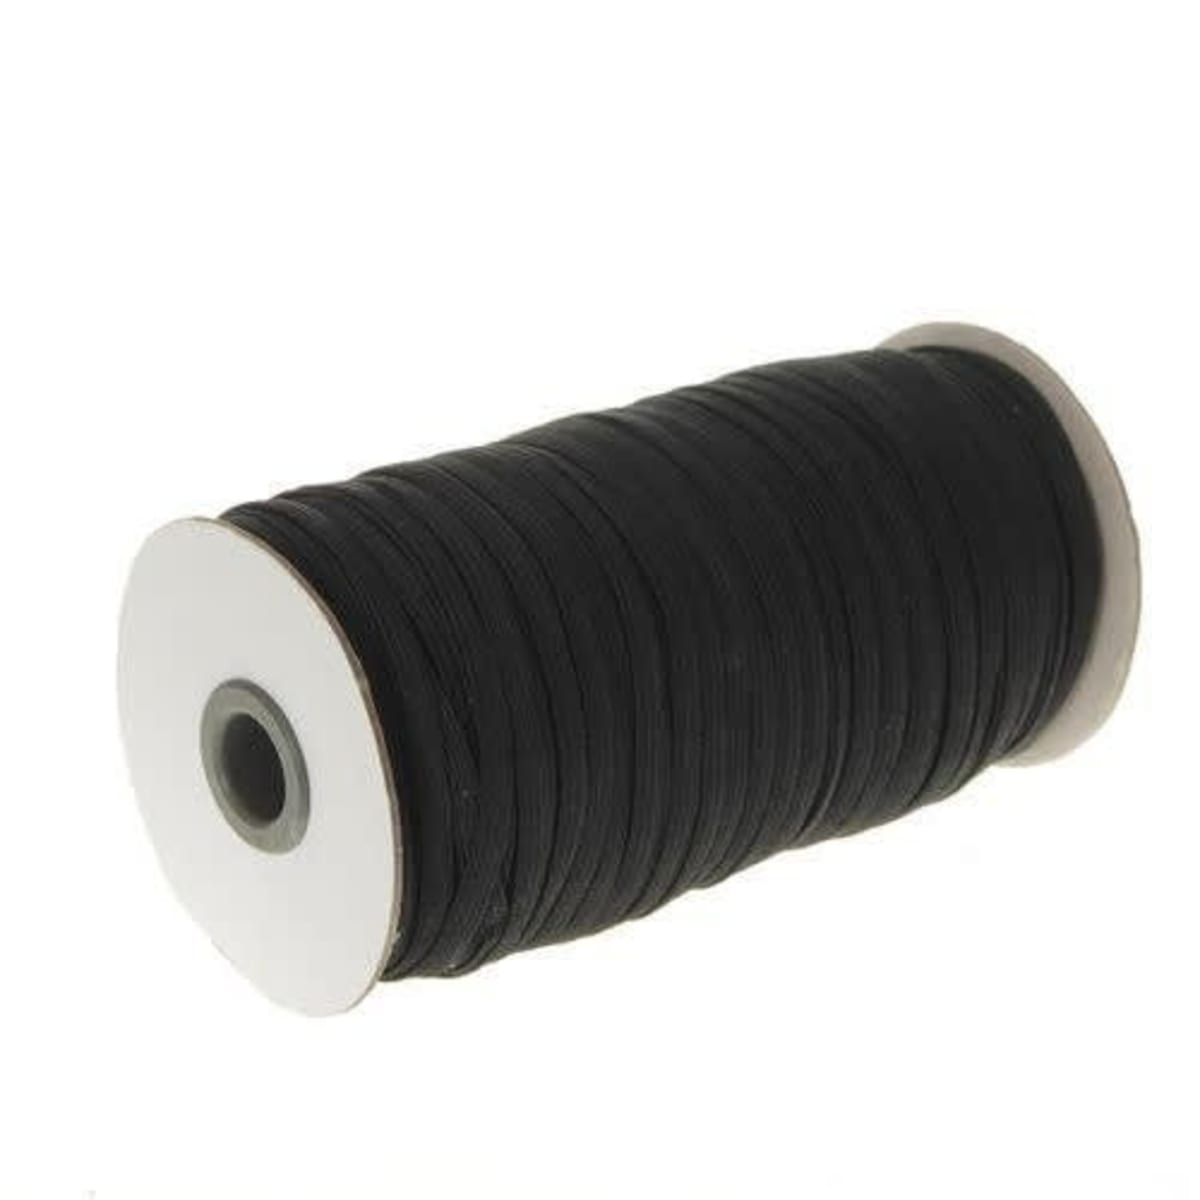 Elastic Band Rope For Sewing & Craft - Black